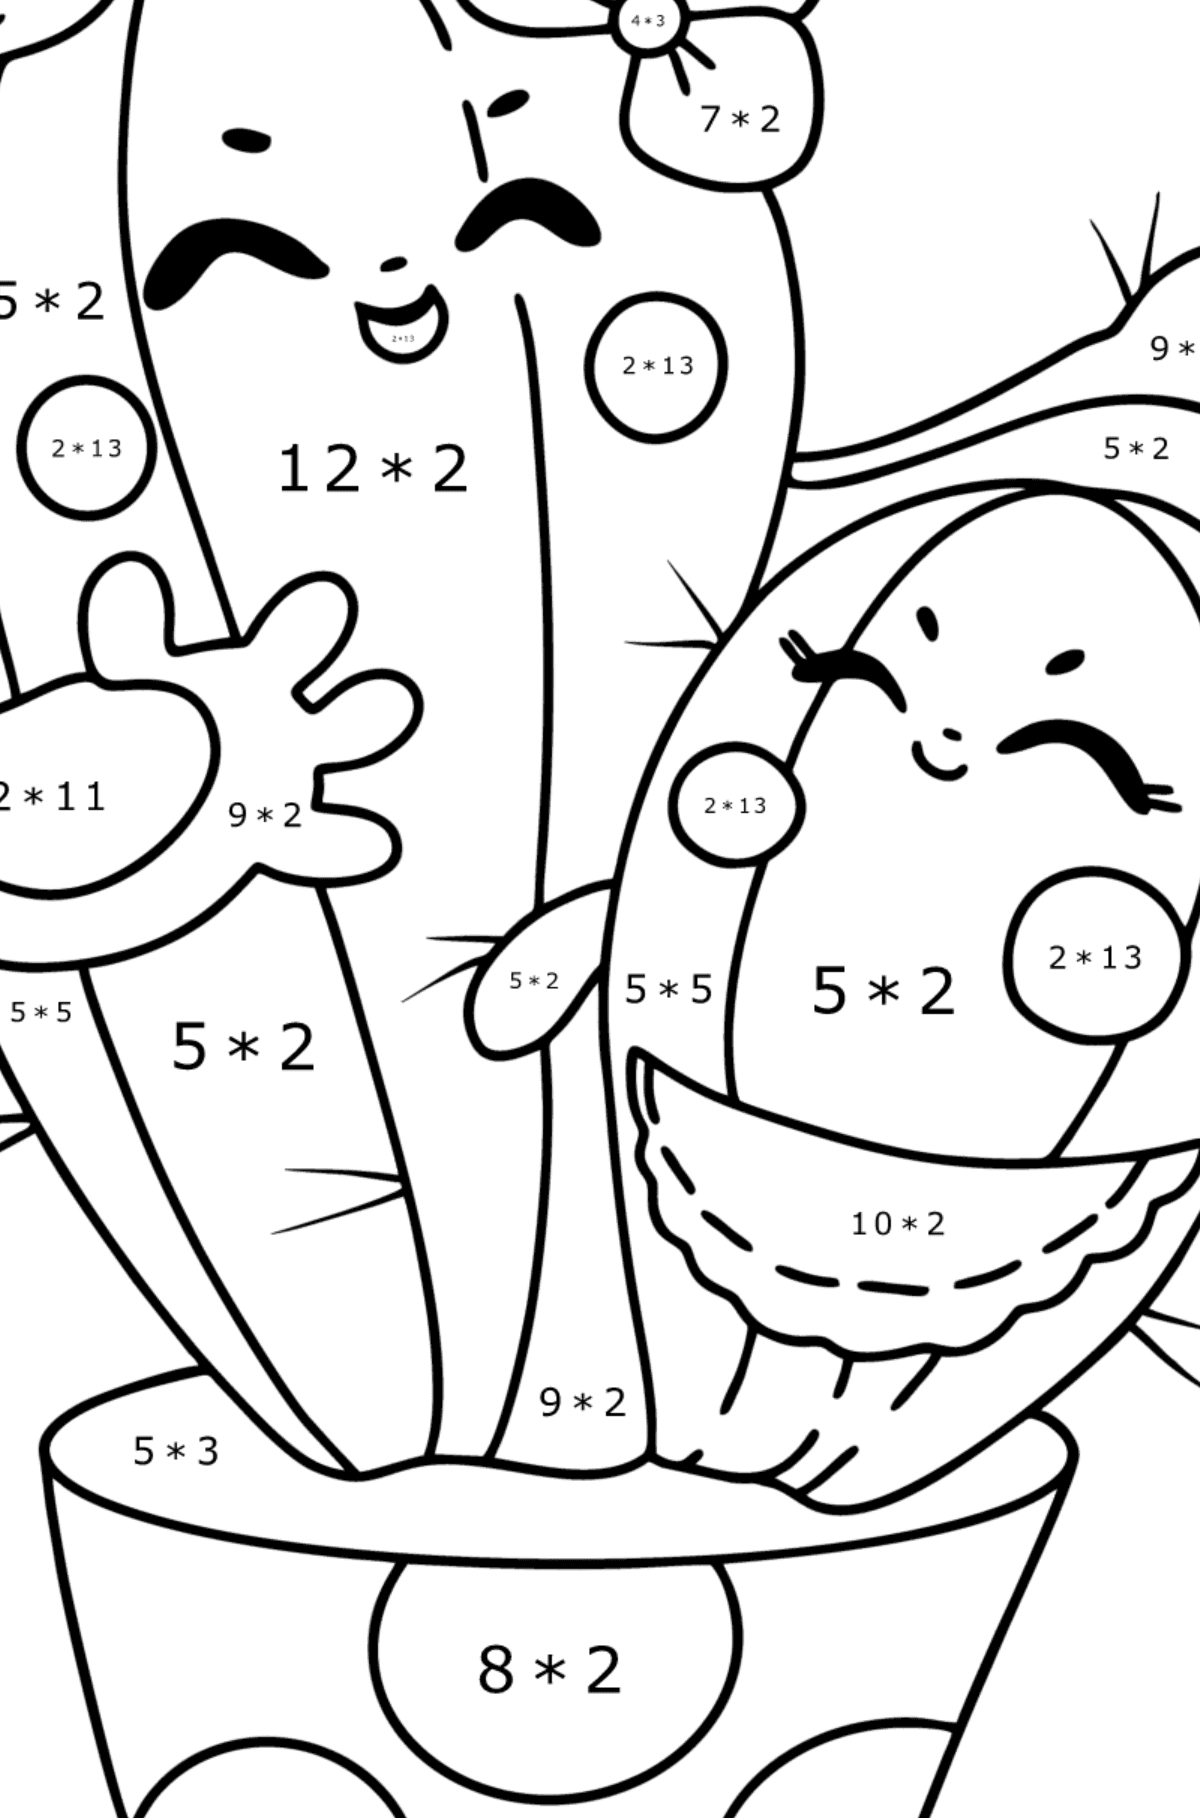 Cartoon Cactus coloring page - Math Coloring - Multiplication for Kids